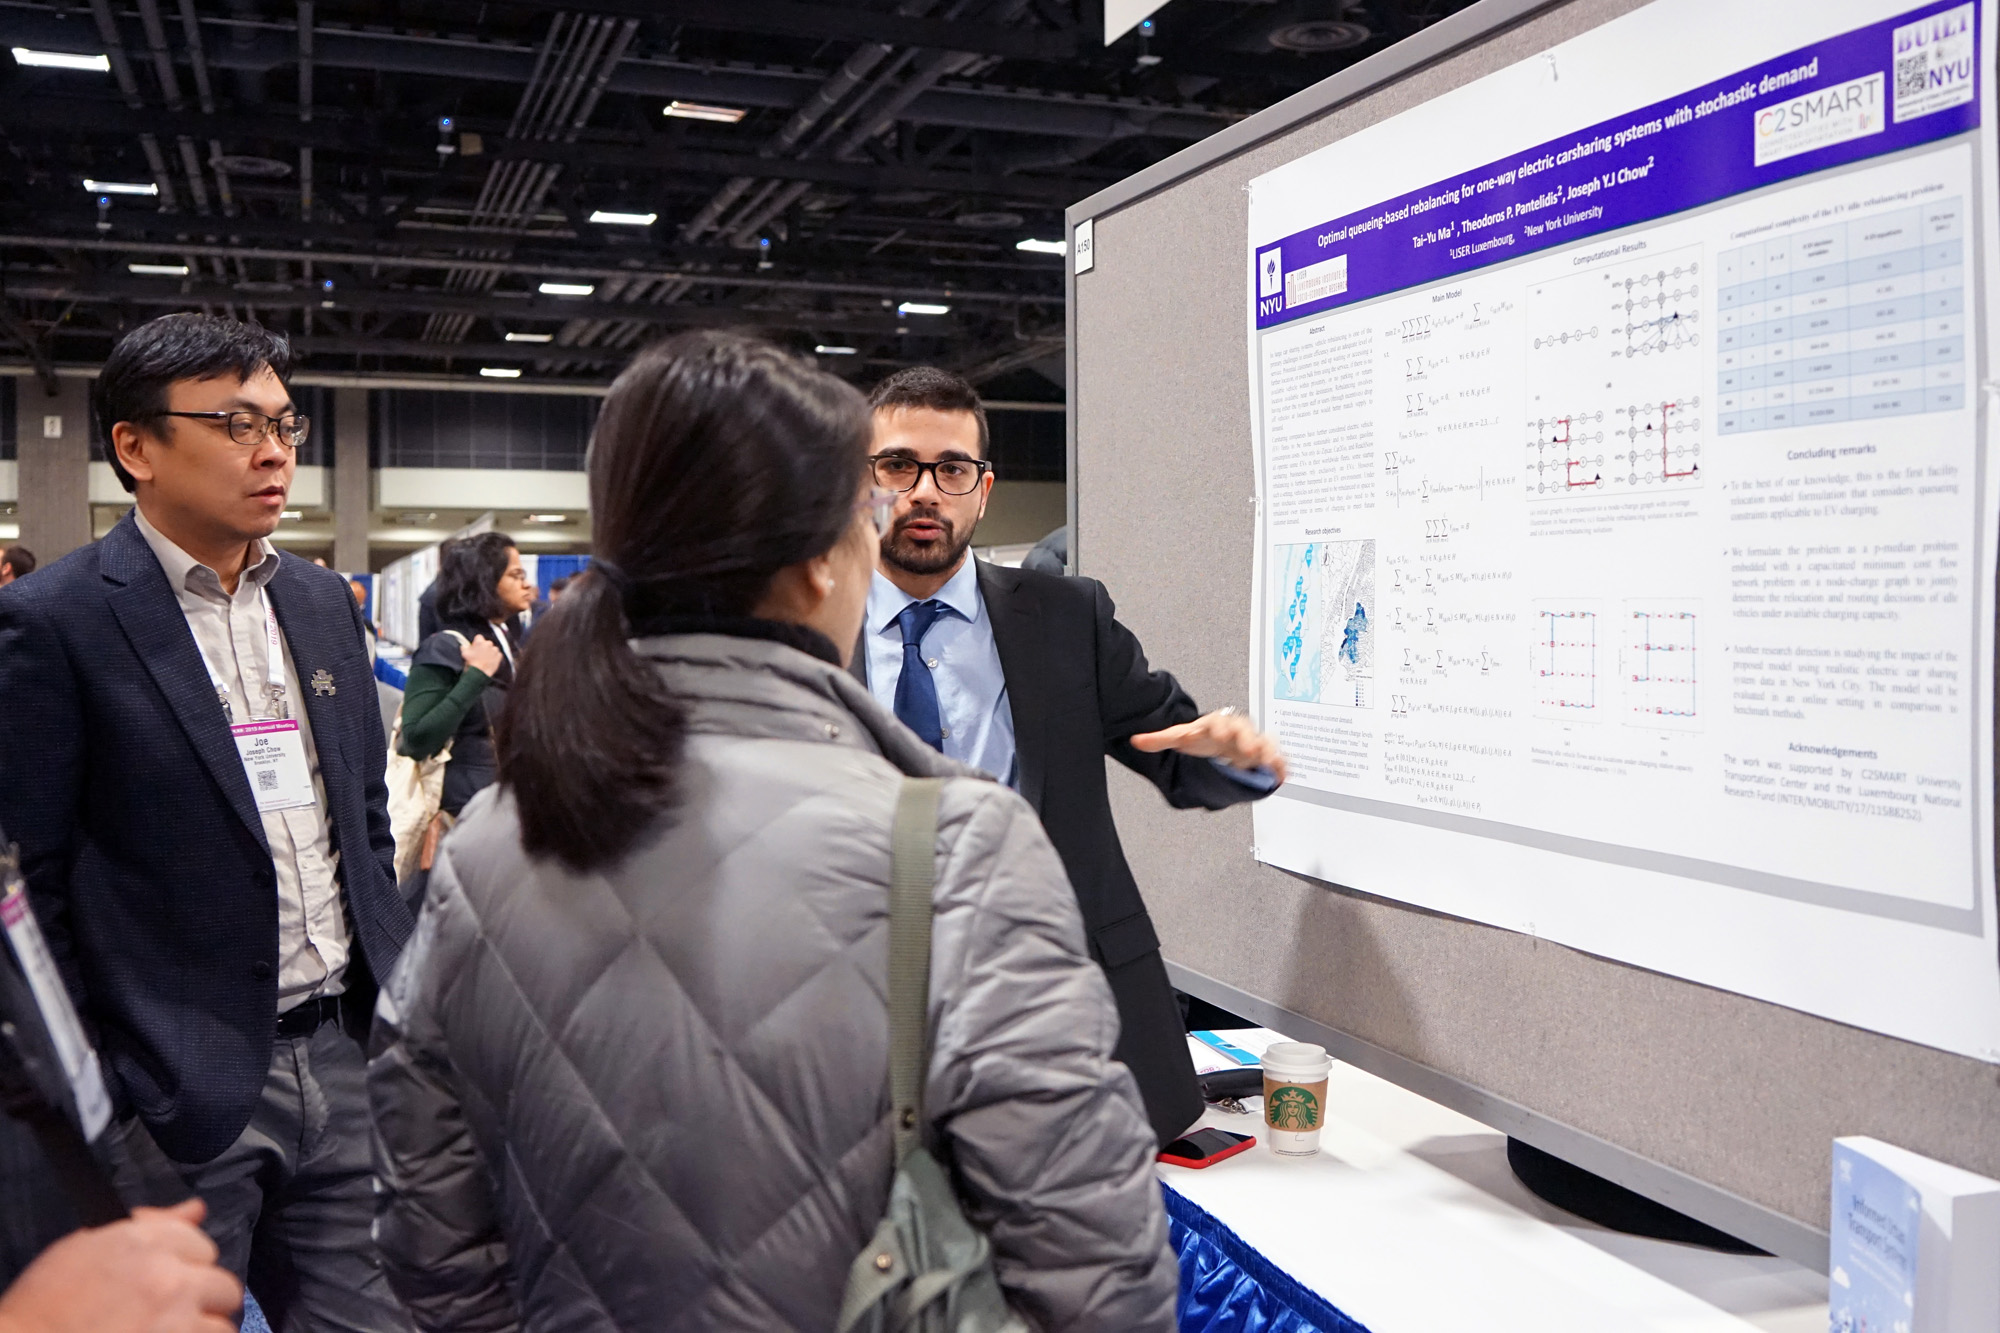 Professor Joseph Chow and graduate student Ted Pantelidis discuss a research poster with conference attendees.